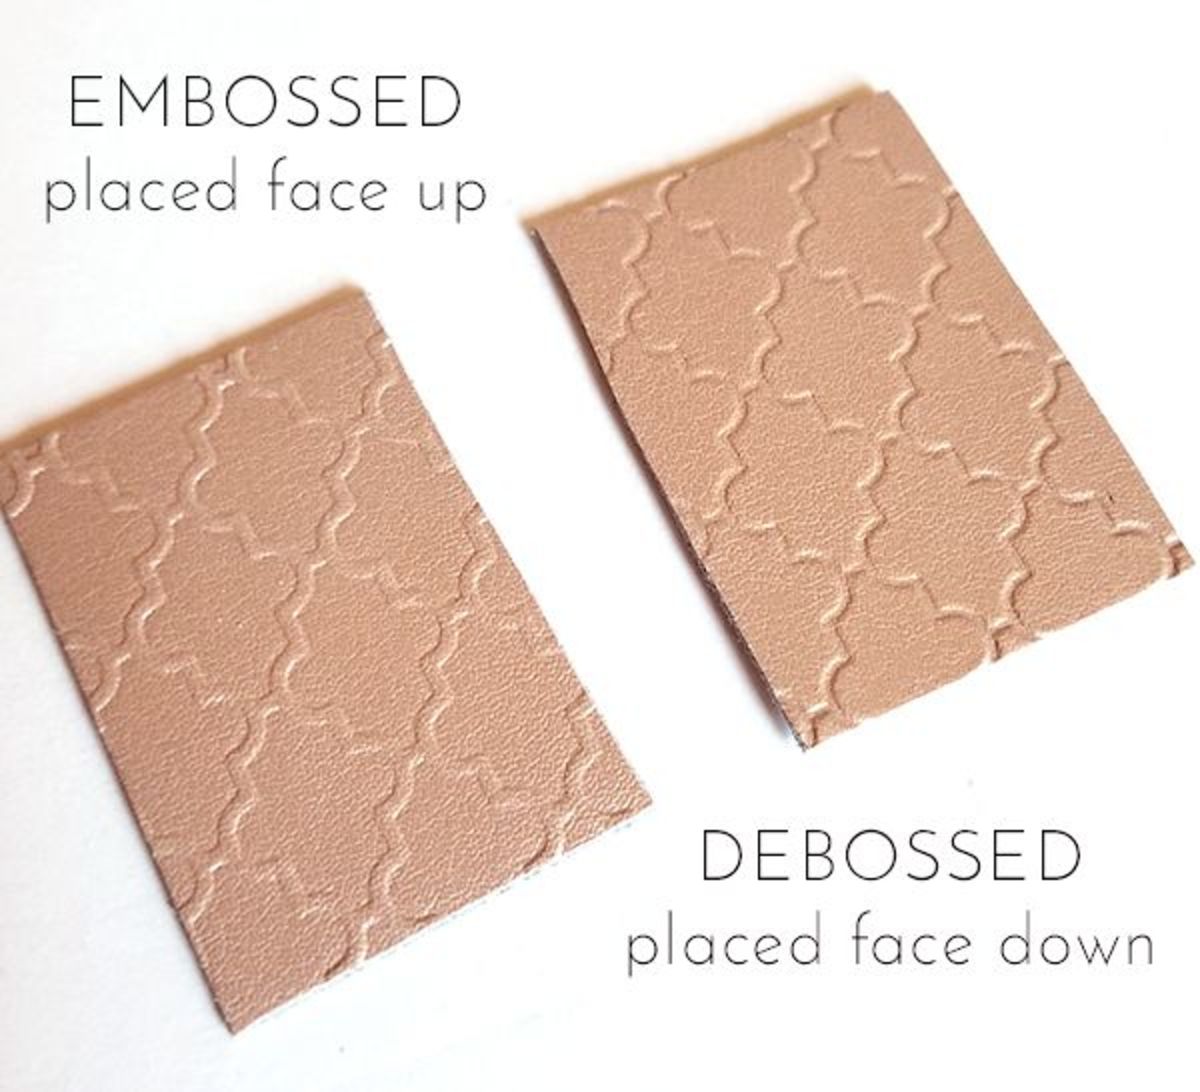 Embossing folders give you options to create an embossed image or a debossed image